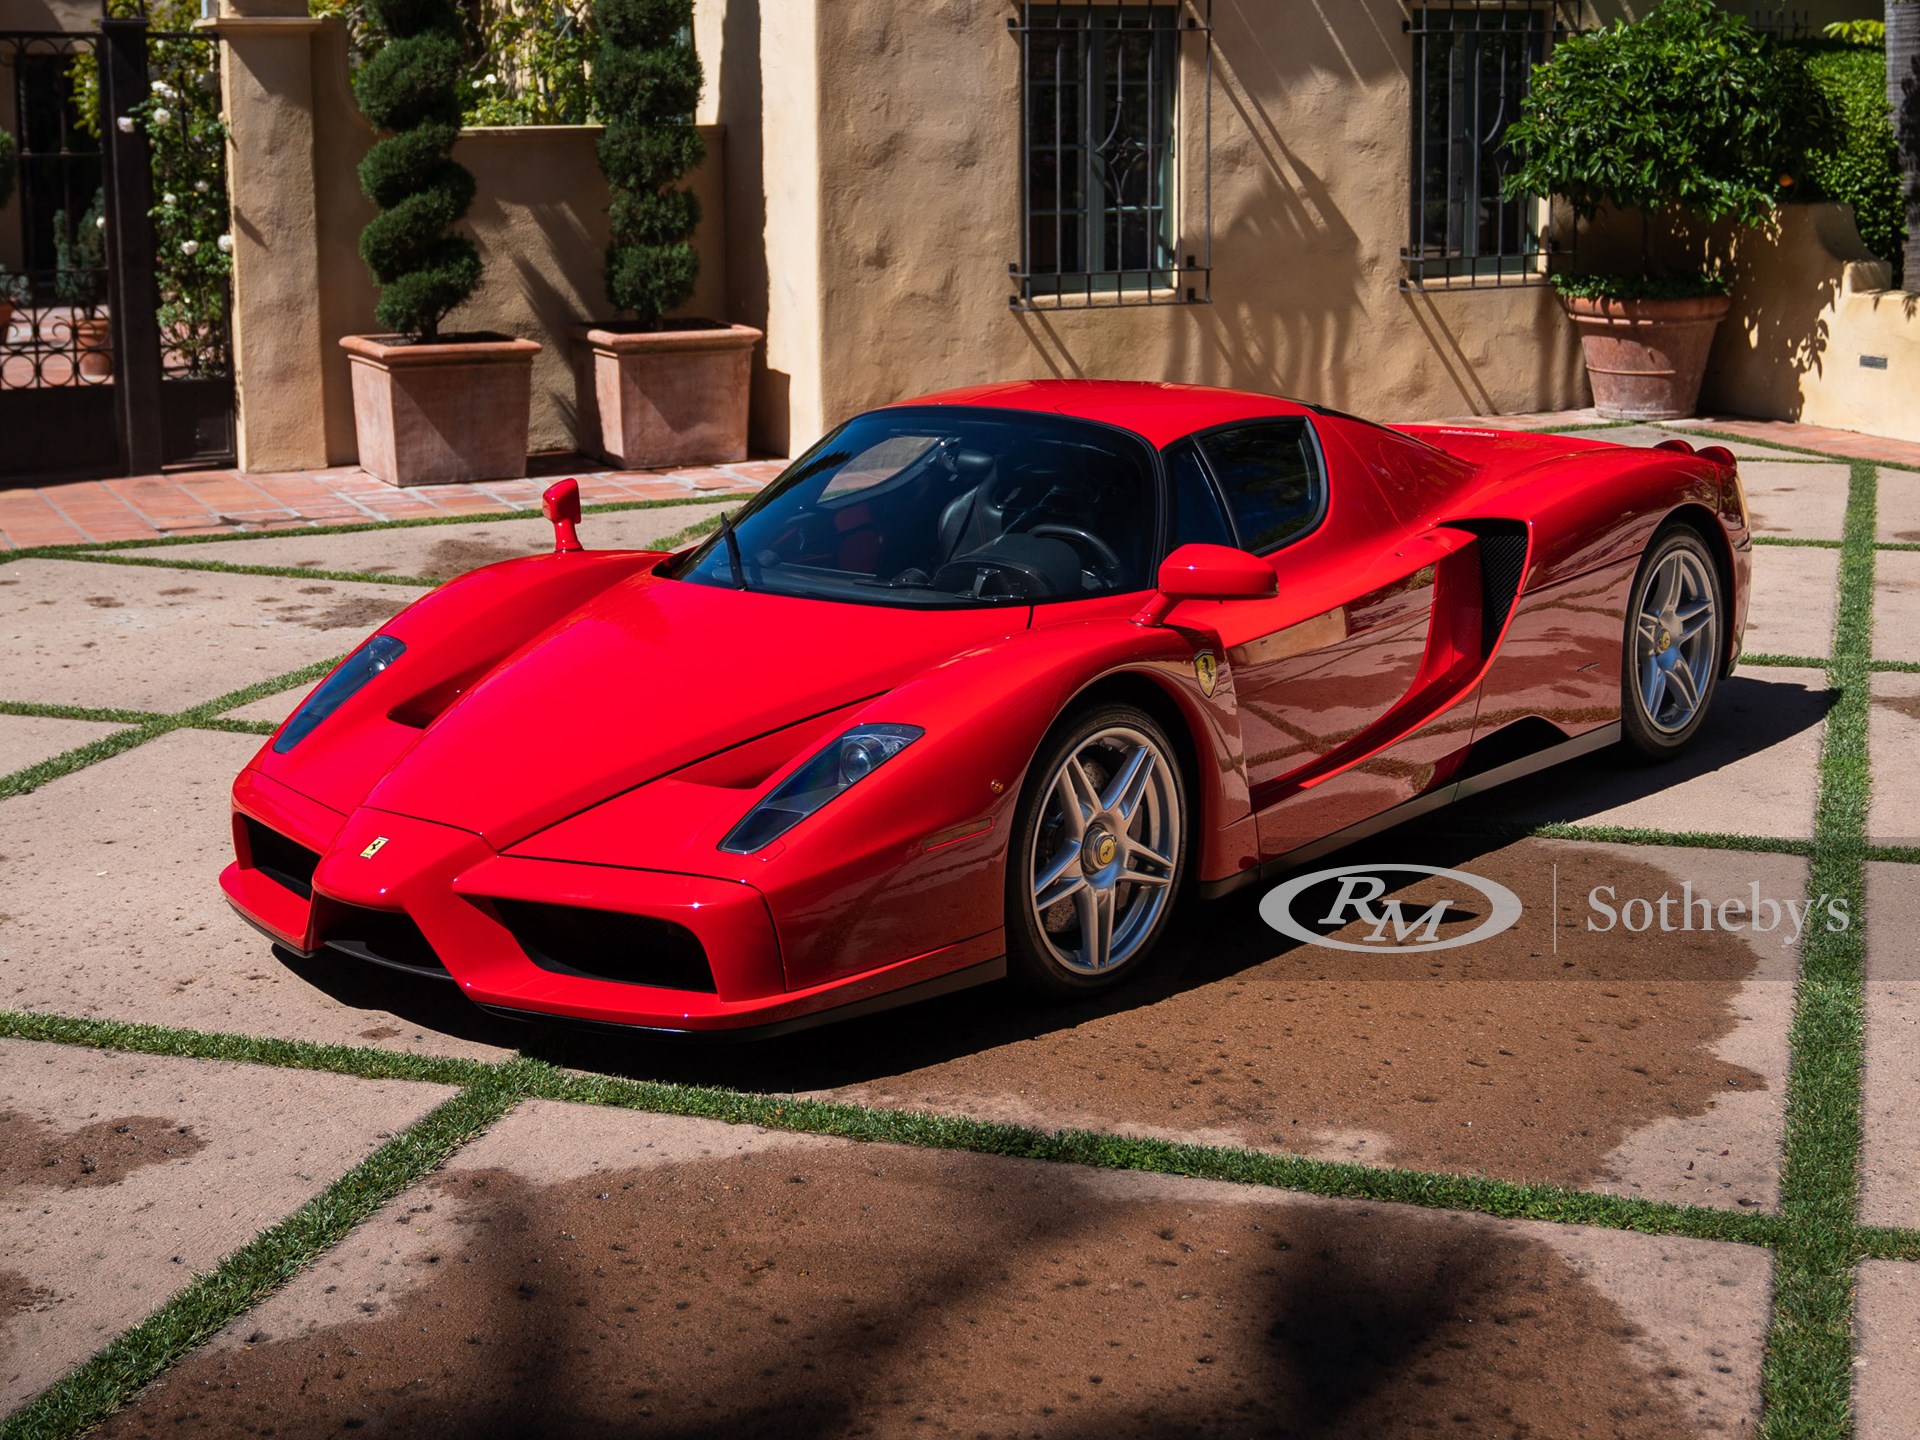 Sold for $2.6 million - This 2003 Enzo Ferrari has become the most ...